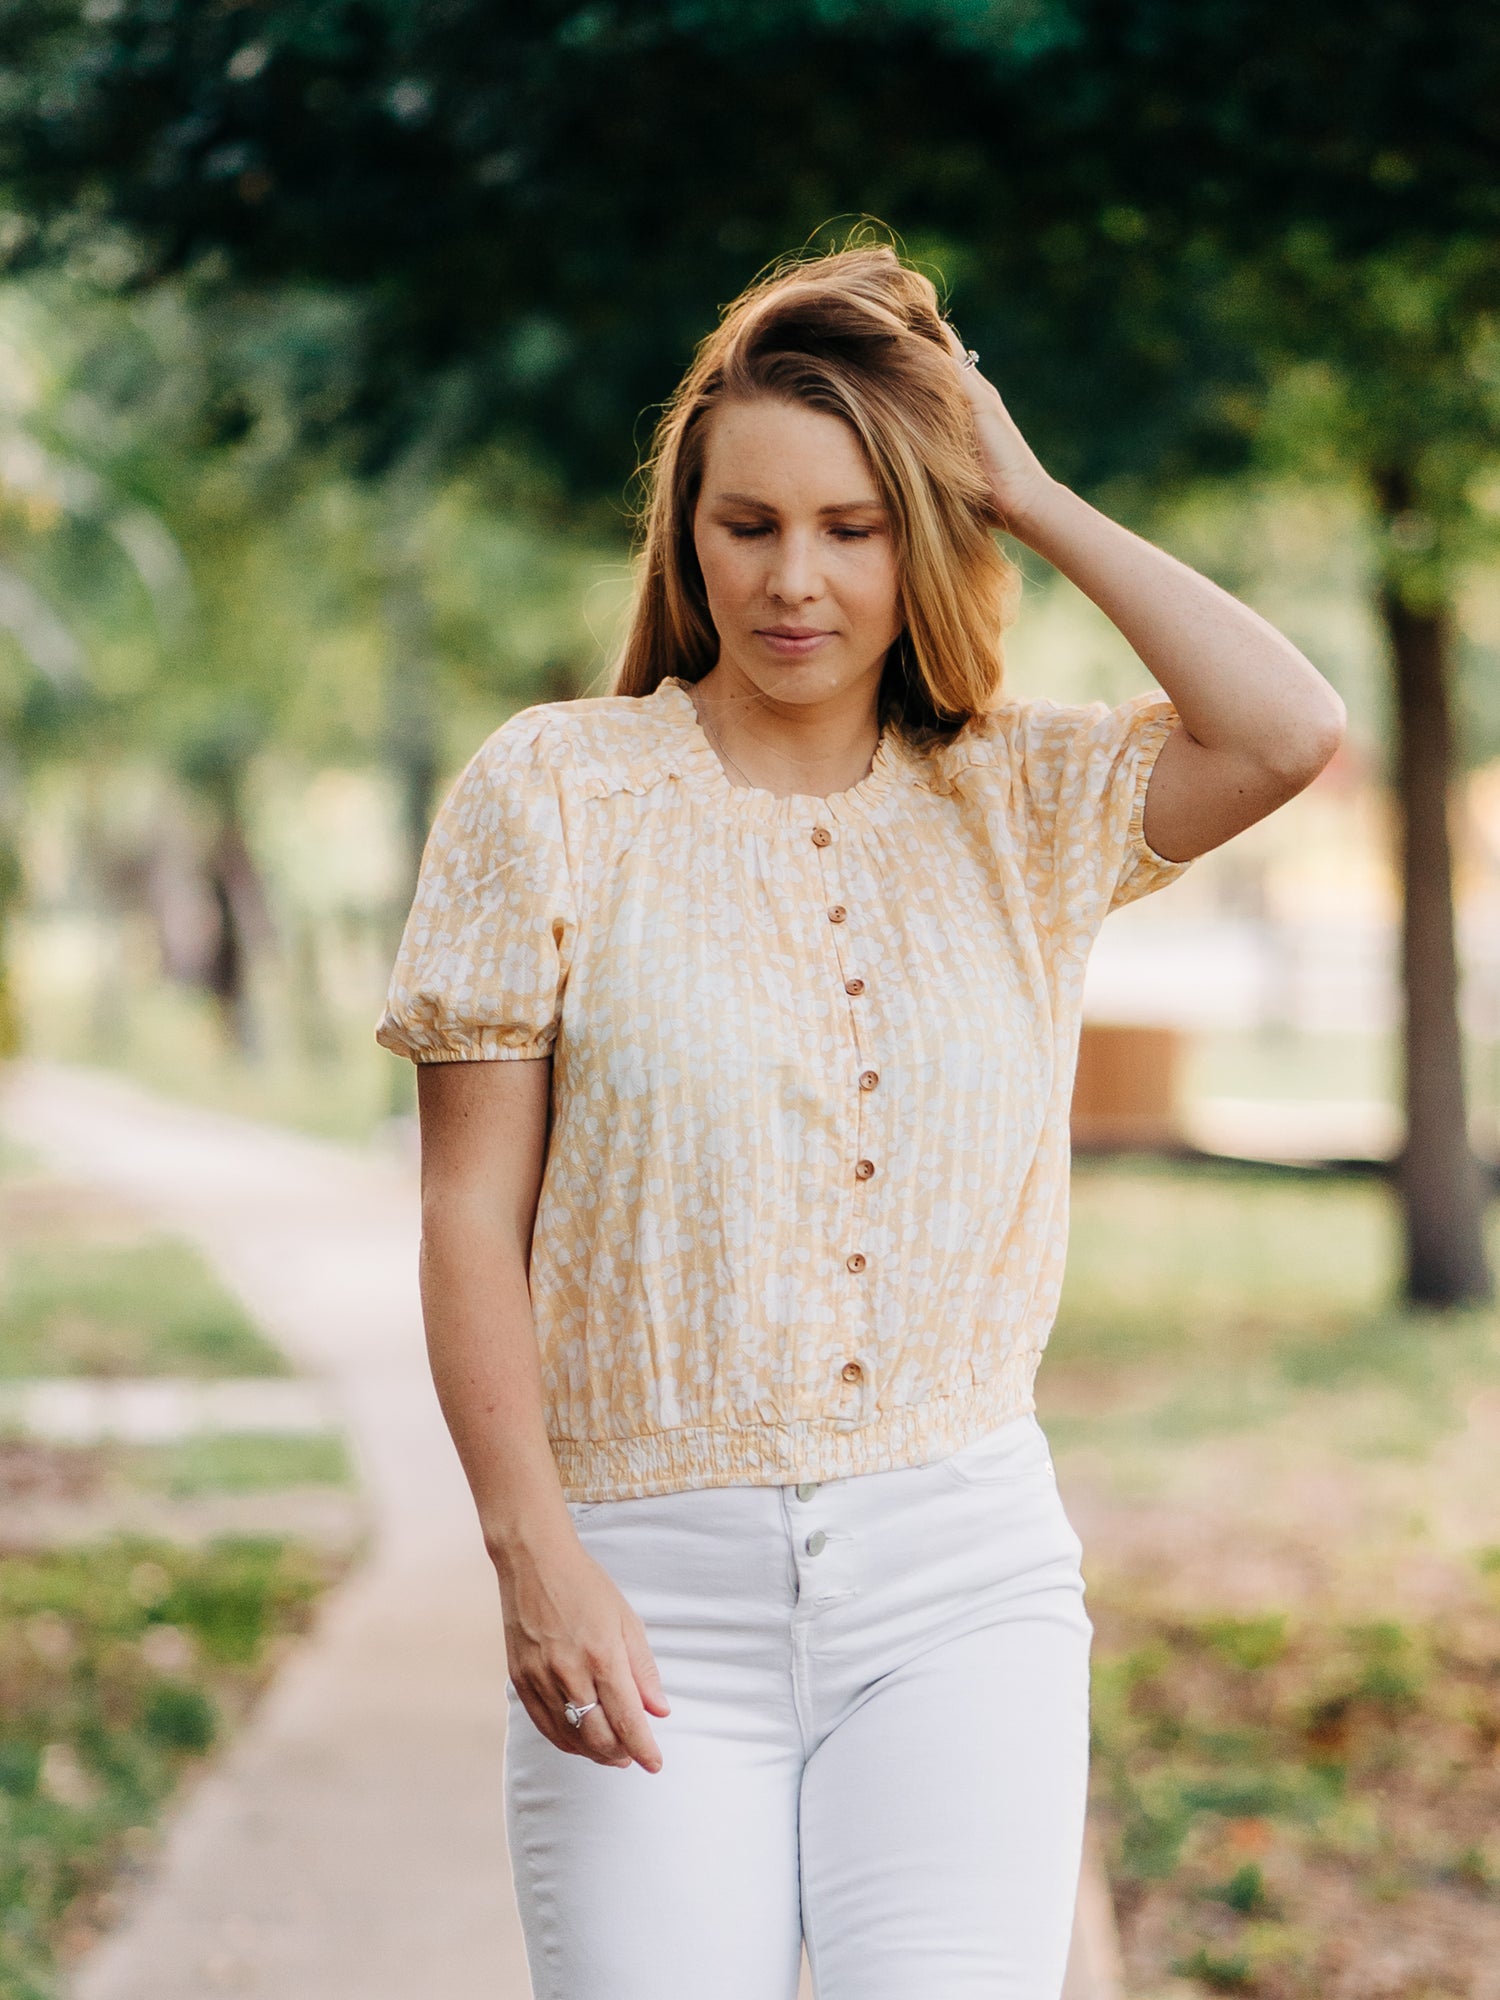 This image of a woman features the product Classic Button Top - I’ve Got Sunshine. This top has functional buttons down the bodice, puff sleeves, and elastic ruffle neckline. It is a pattern of white flowers on a bright yellow background.